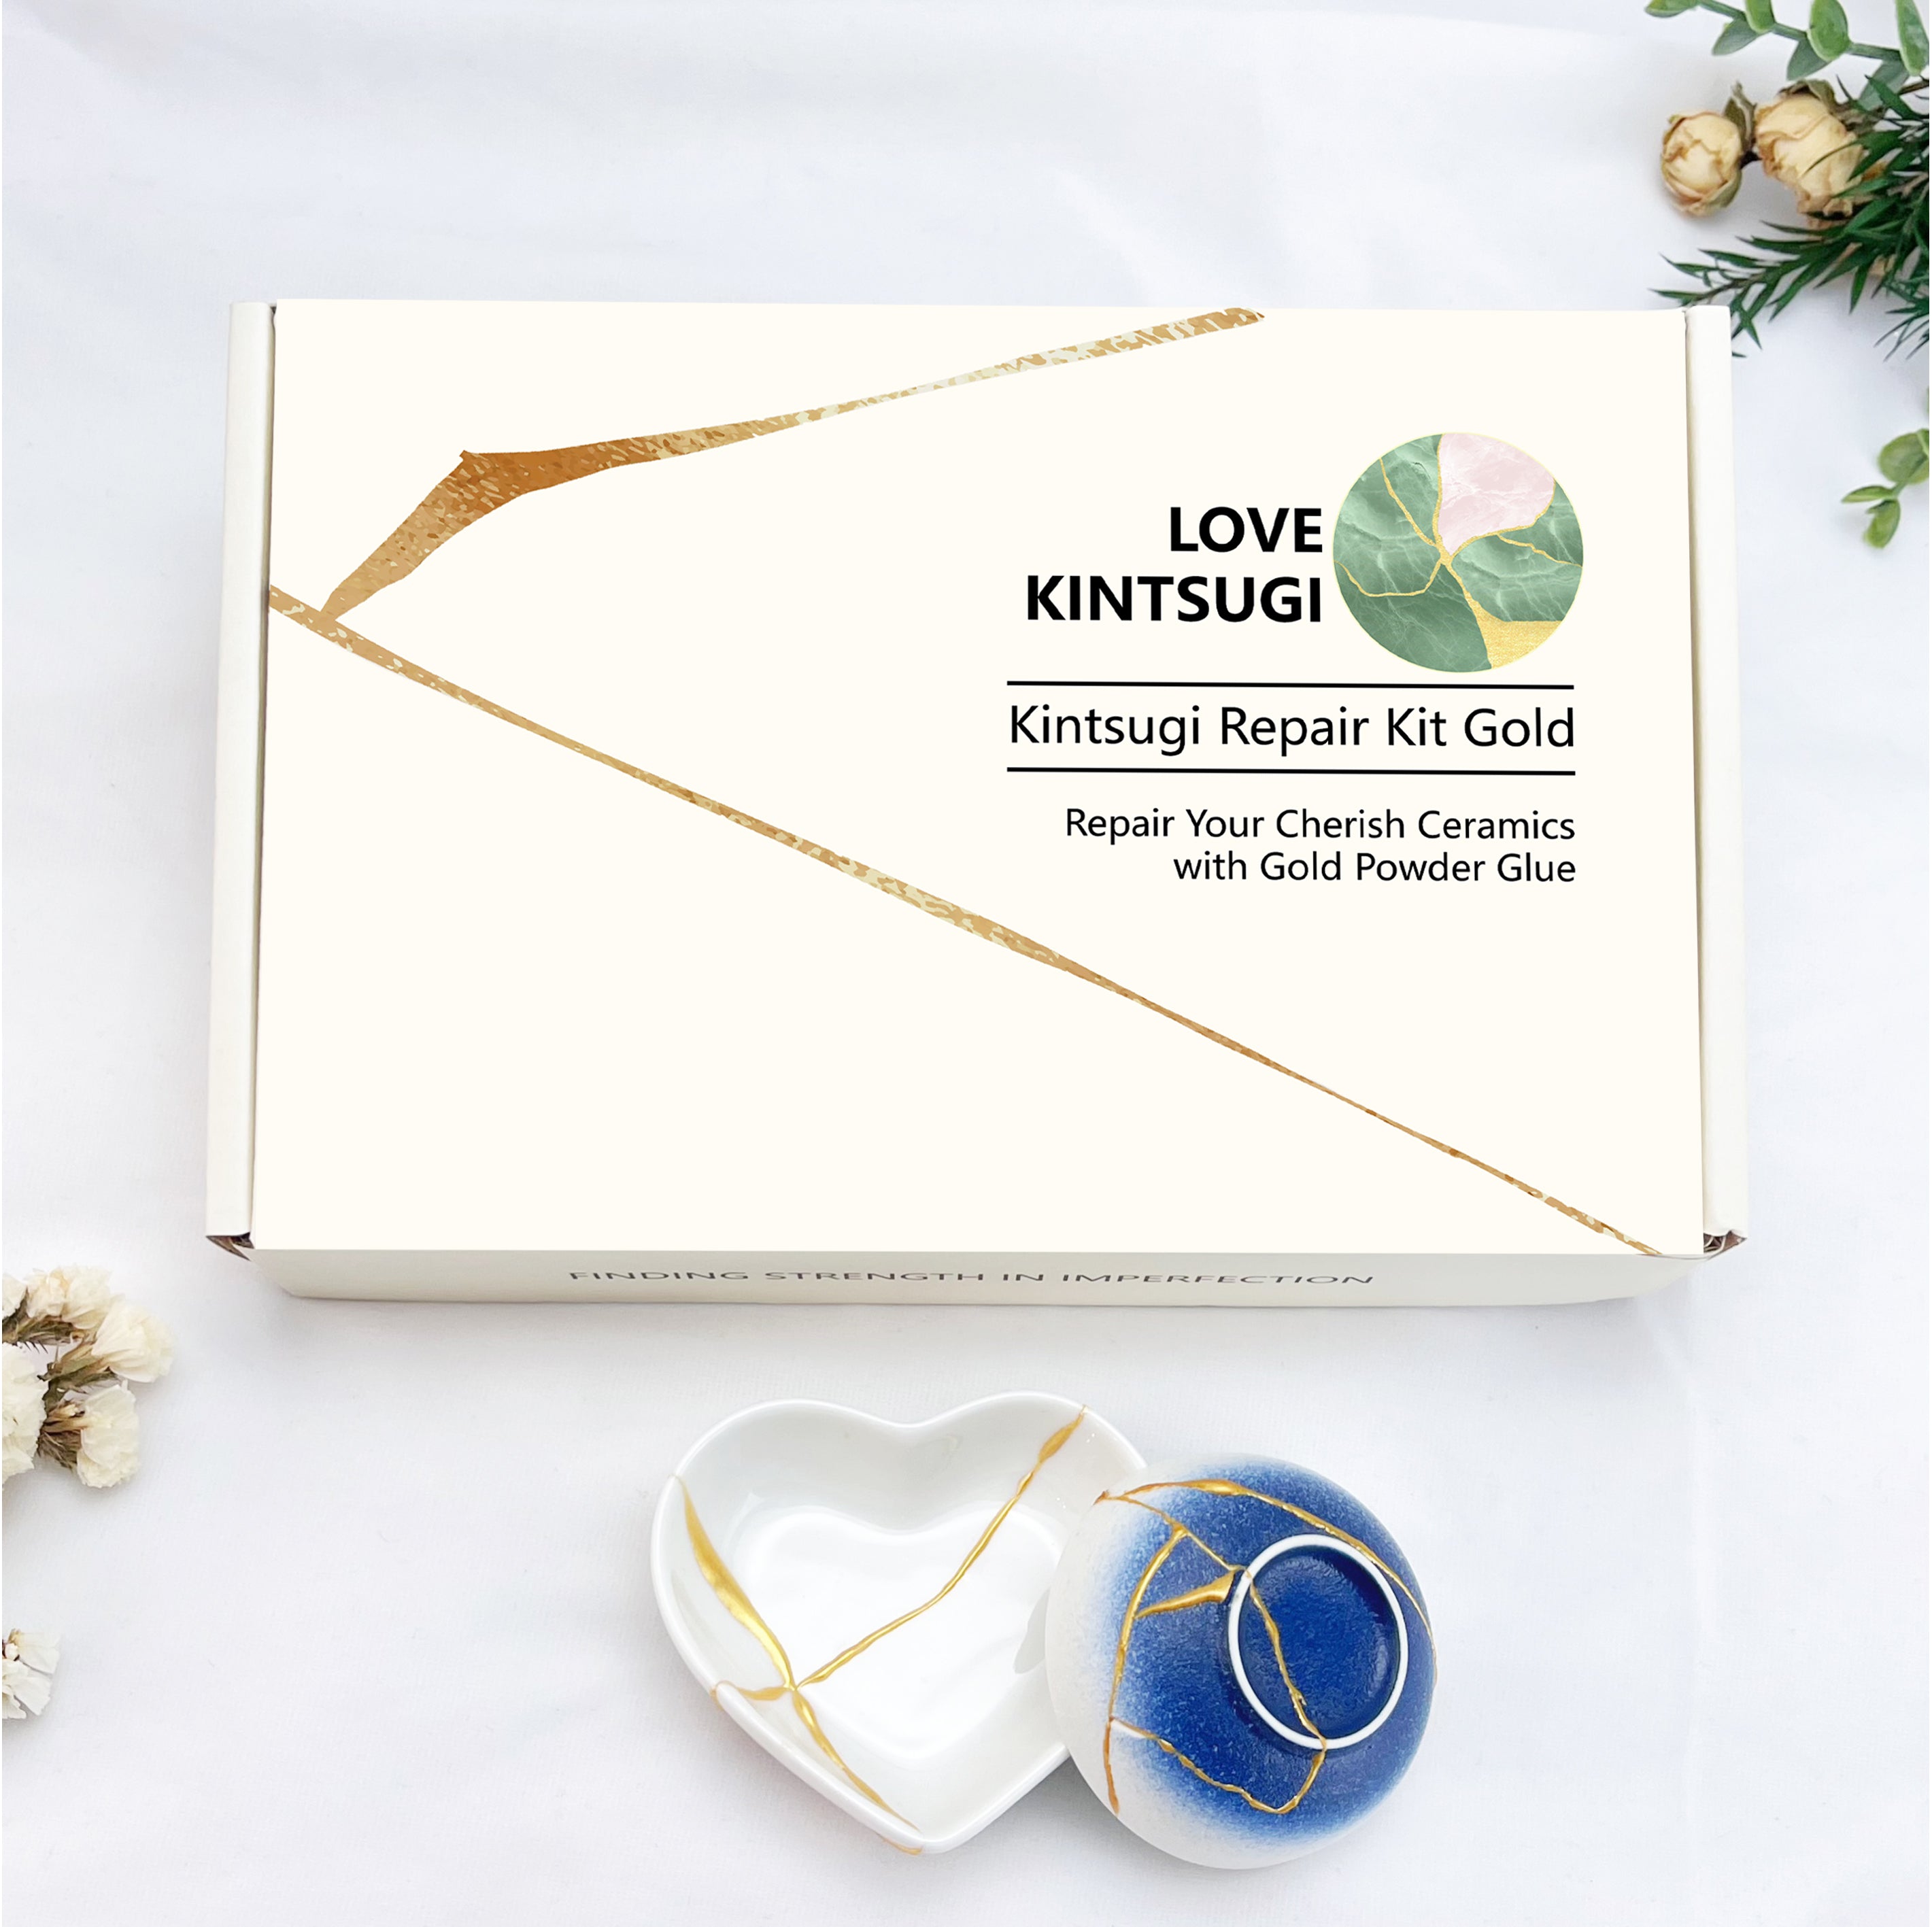 Kintsugi Repair Kit Gold Japanese Kintsugi Kit to Improve Your Ceramic  Repair Your Meaningful Pottery with Gold Powder Glue Perfect for Beginners  Restoring Meaningful Gifts